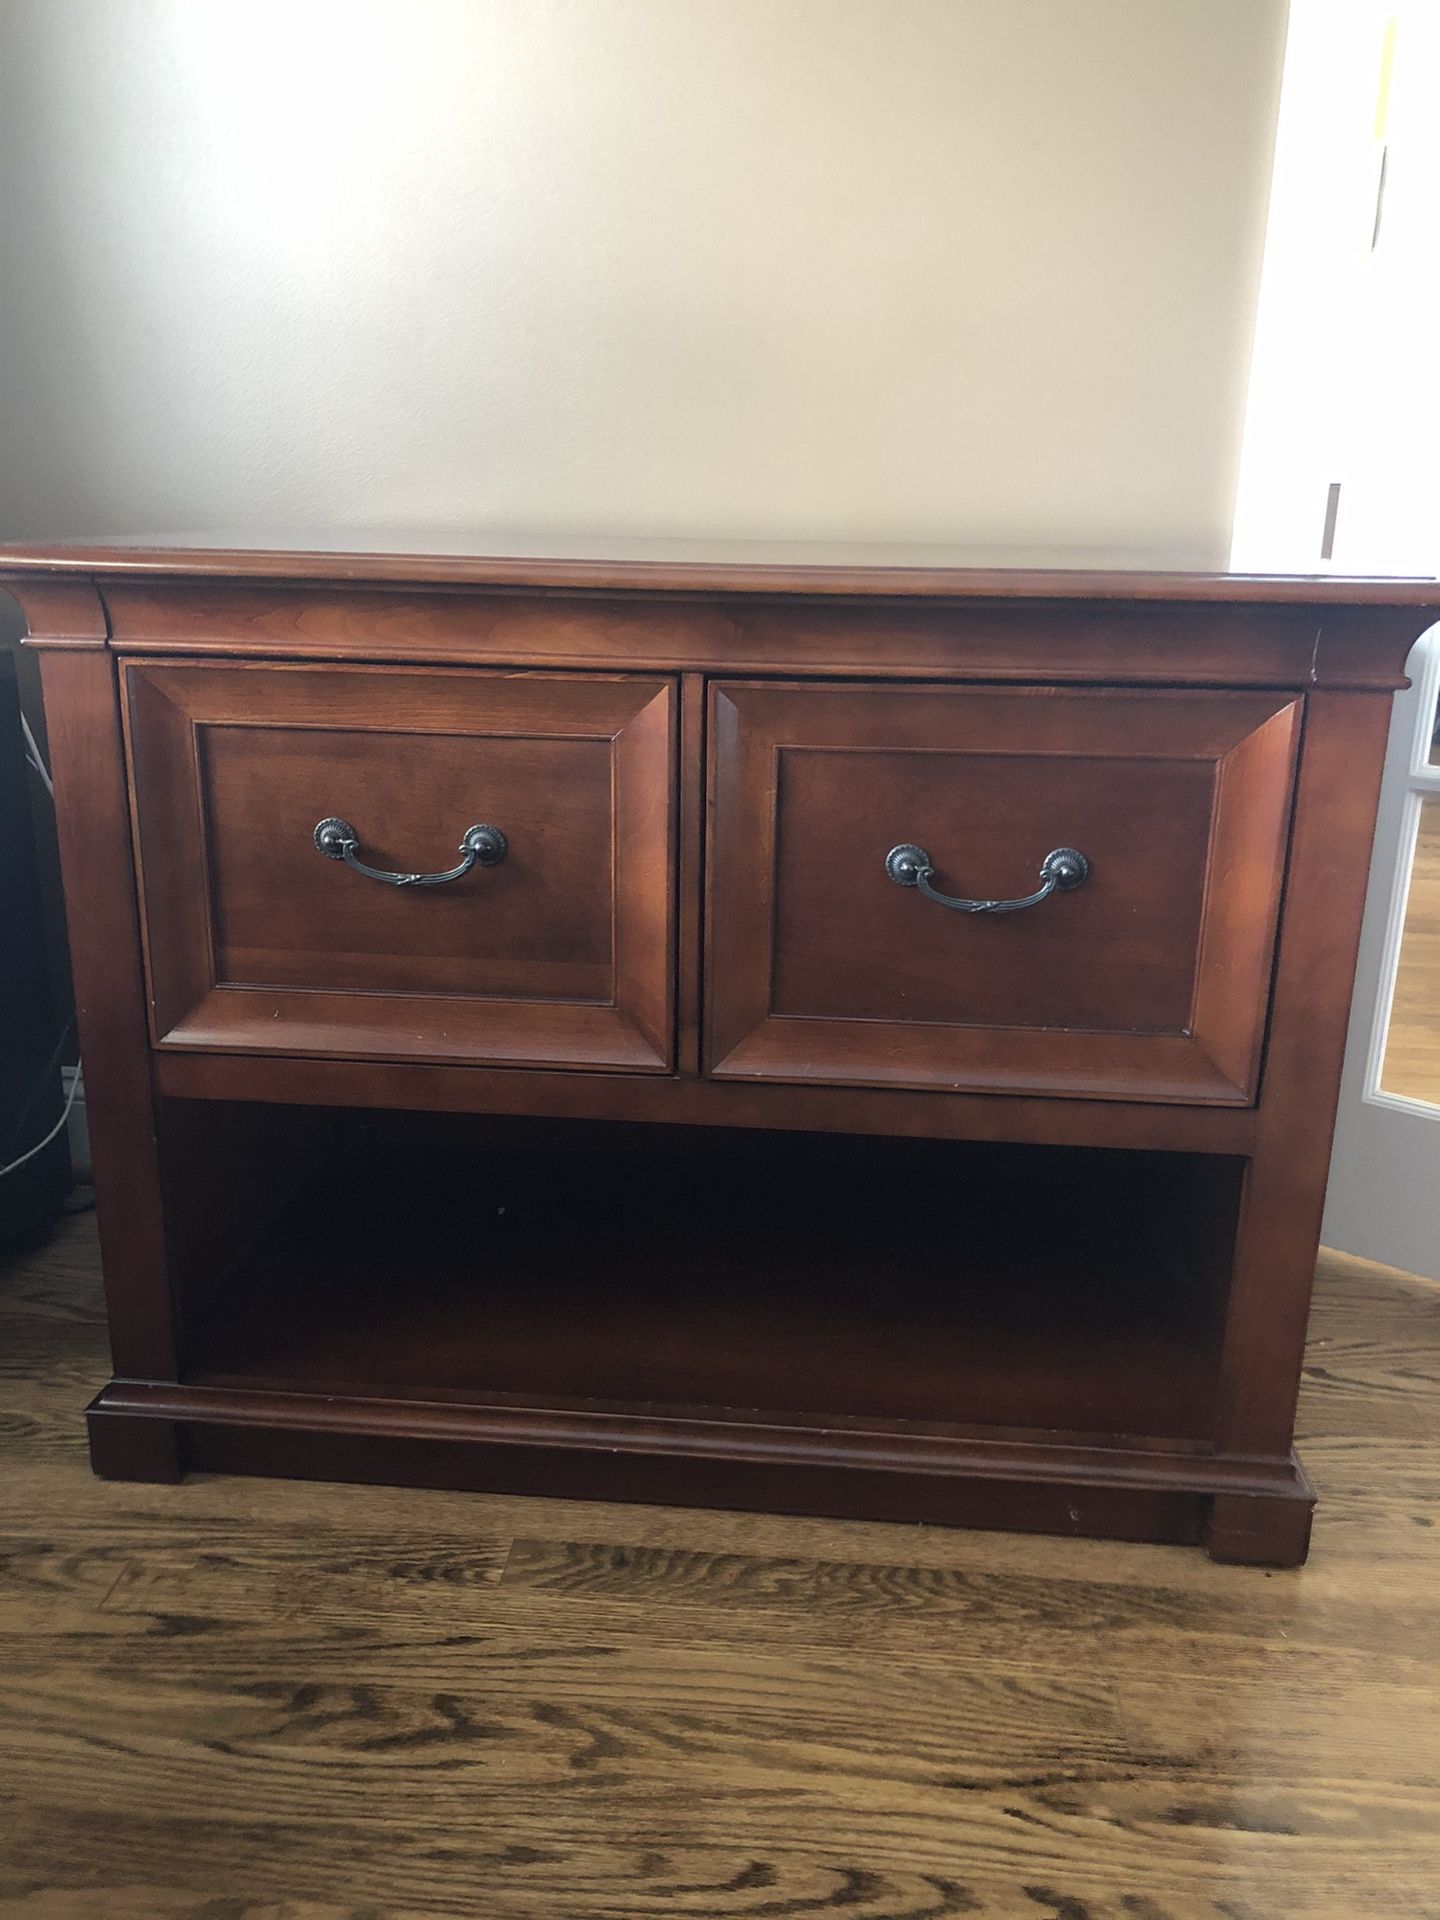 Desk Credenza - perfect for home office. Great condition. 40” wide x 22.5” deep x 30” wide